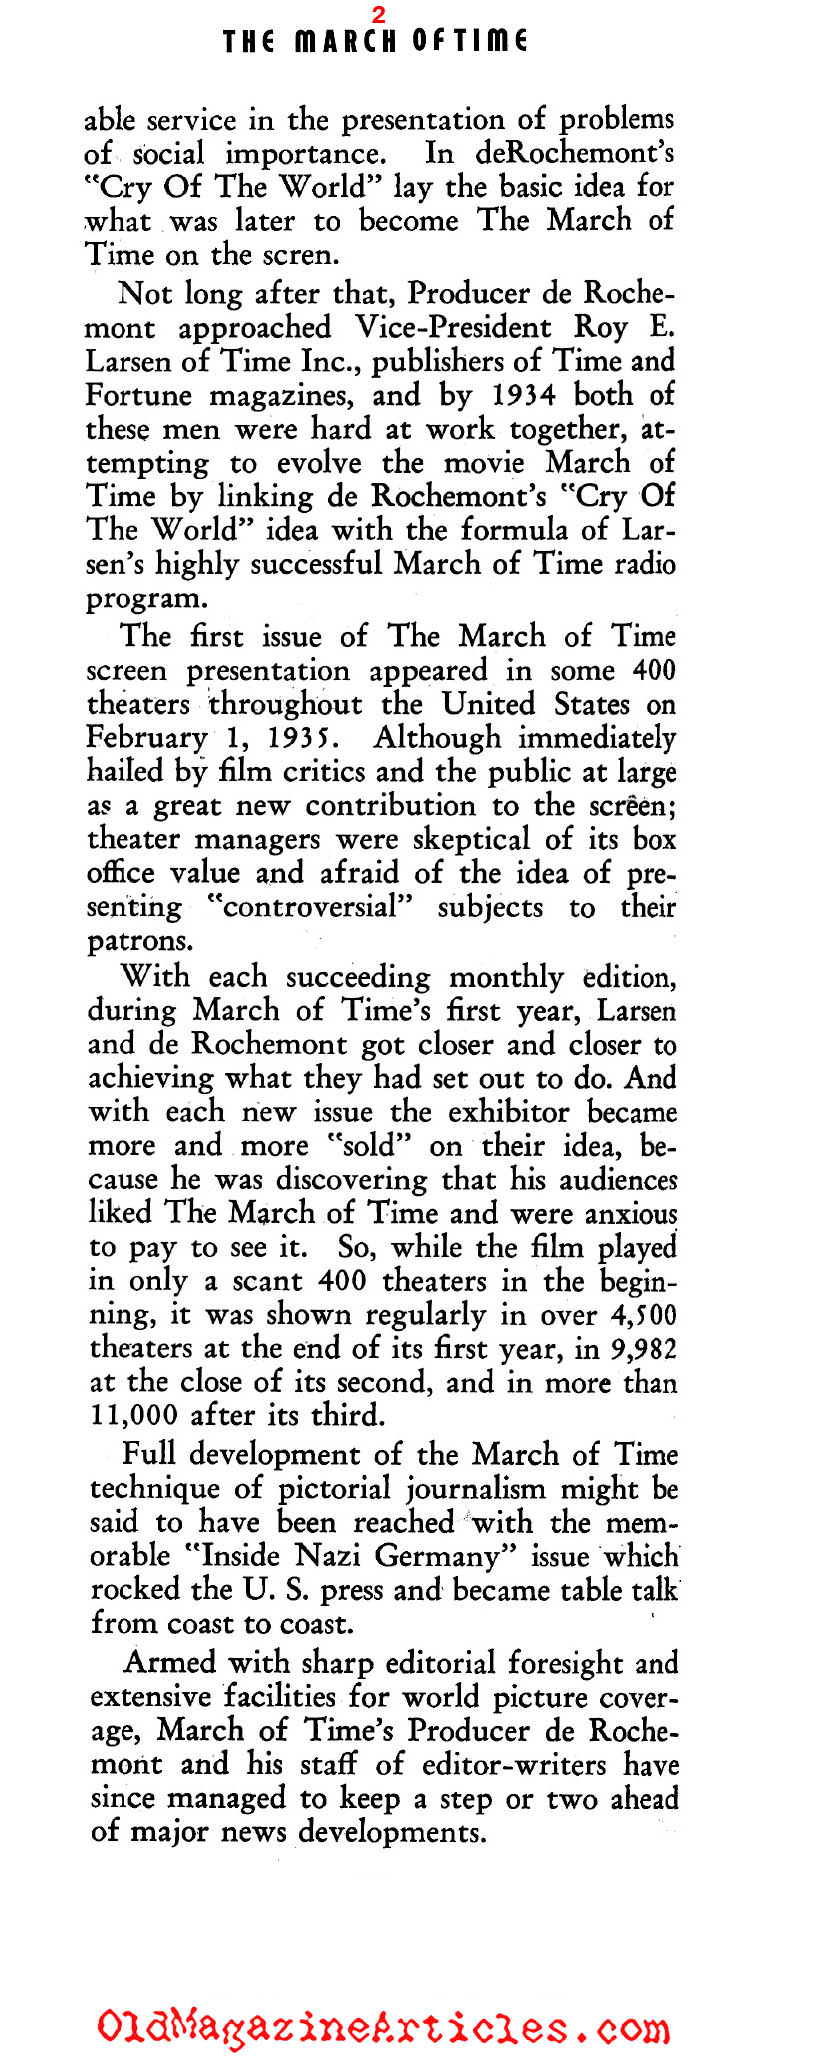 The March of Time: Newsreel Journalism (Film Daily, 1939)